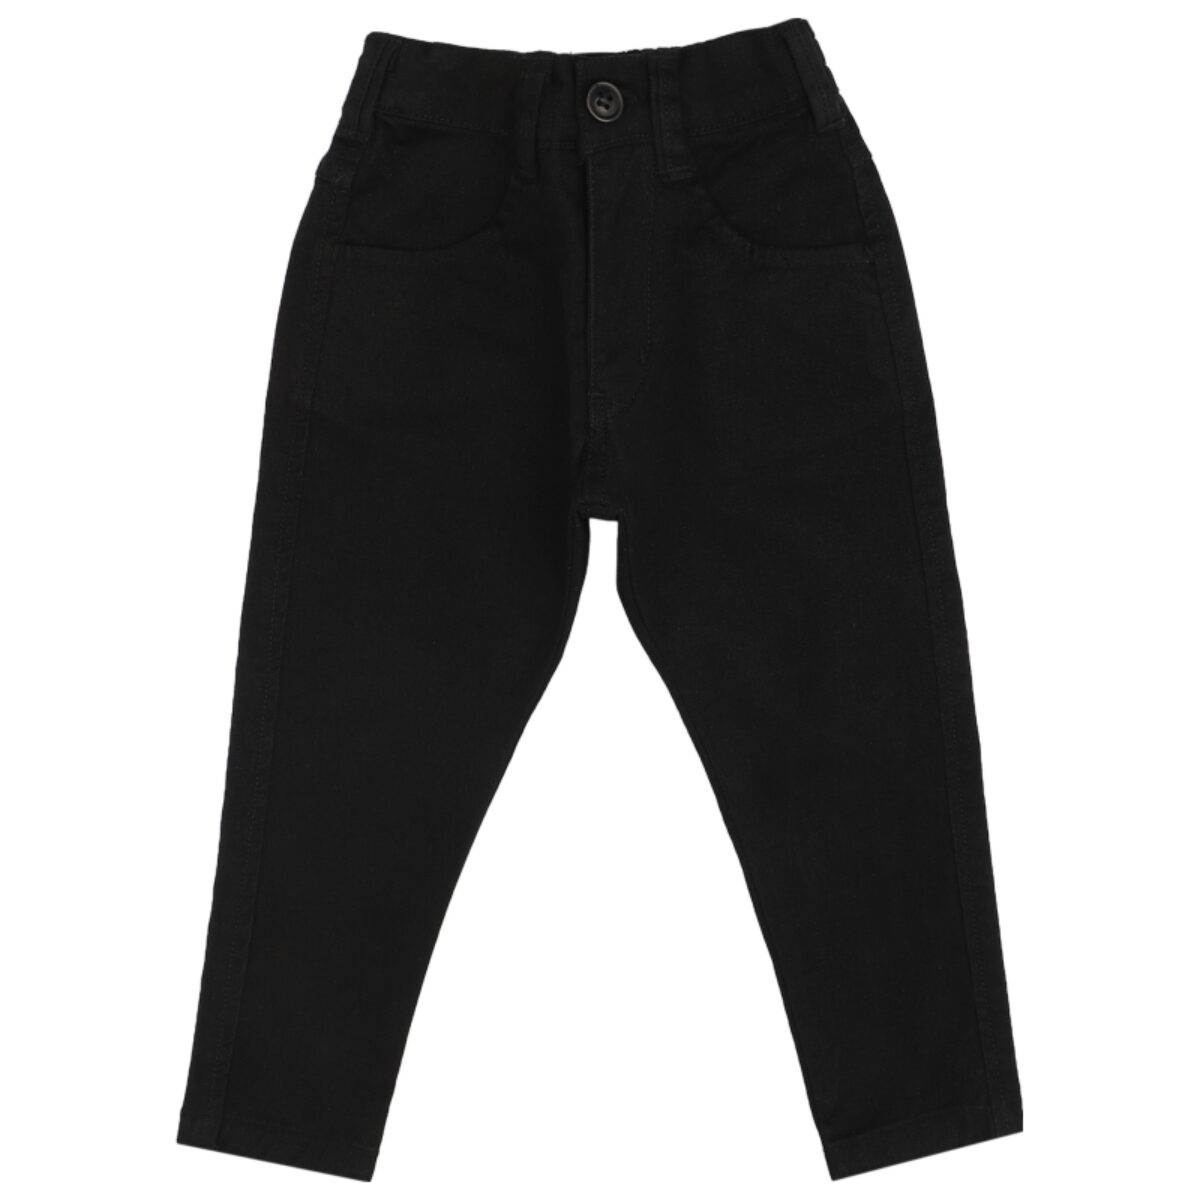 Cotton Narrow Fit Ladies Black Formal Pants, 30.0 at Rs 250/piece in  Ghaziabad